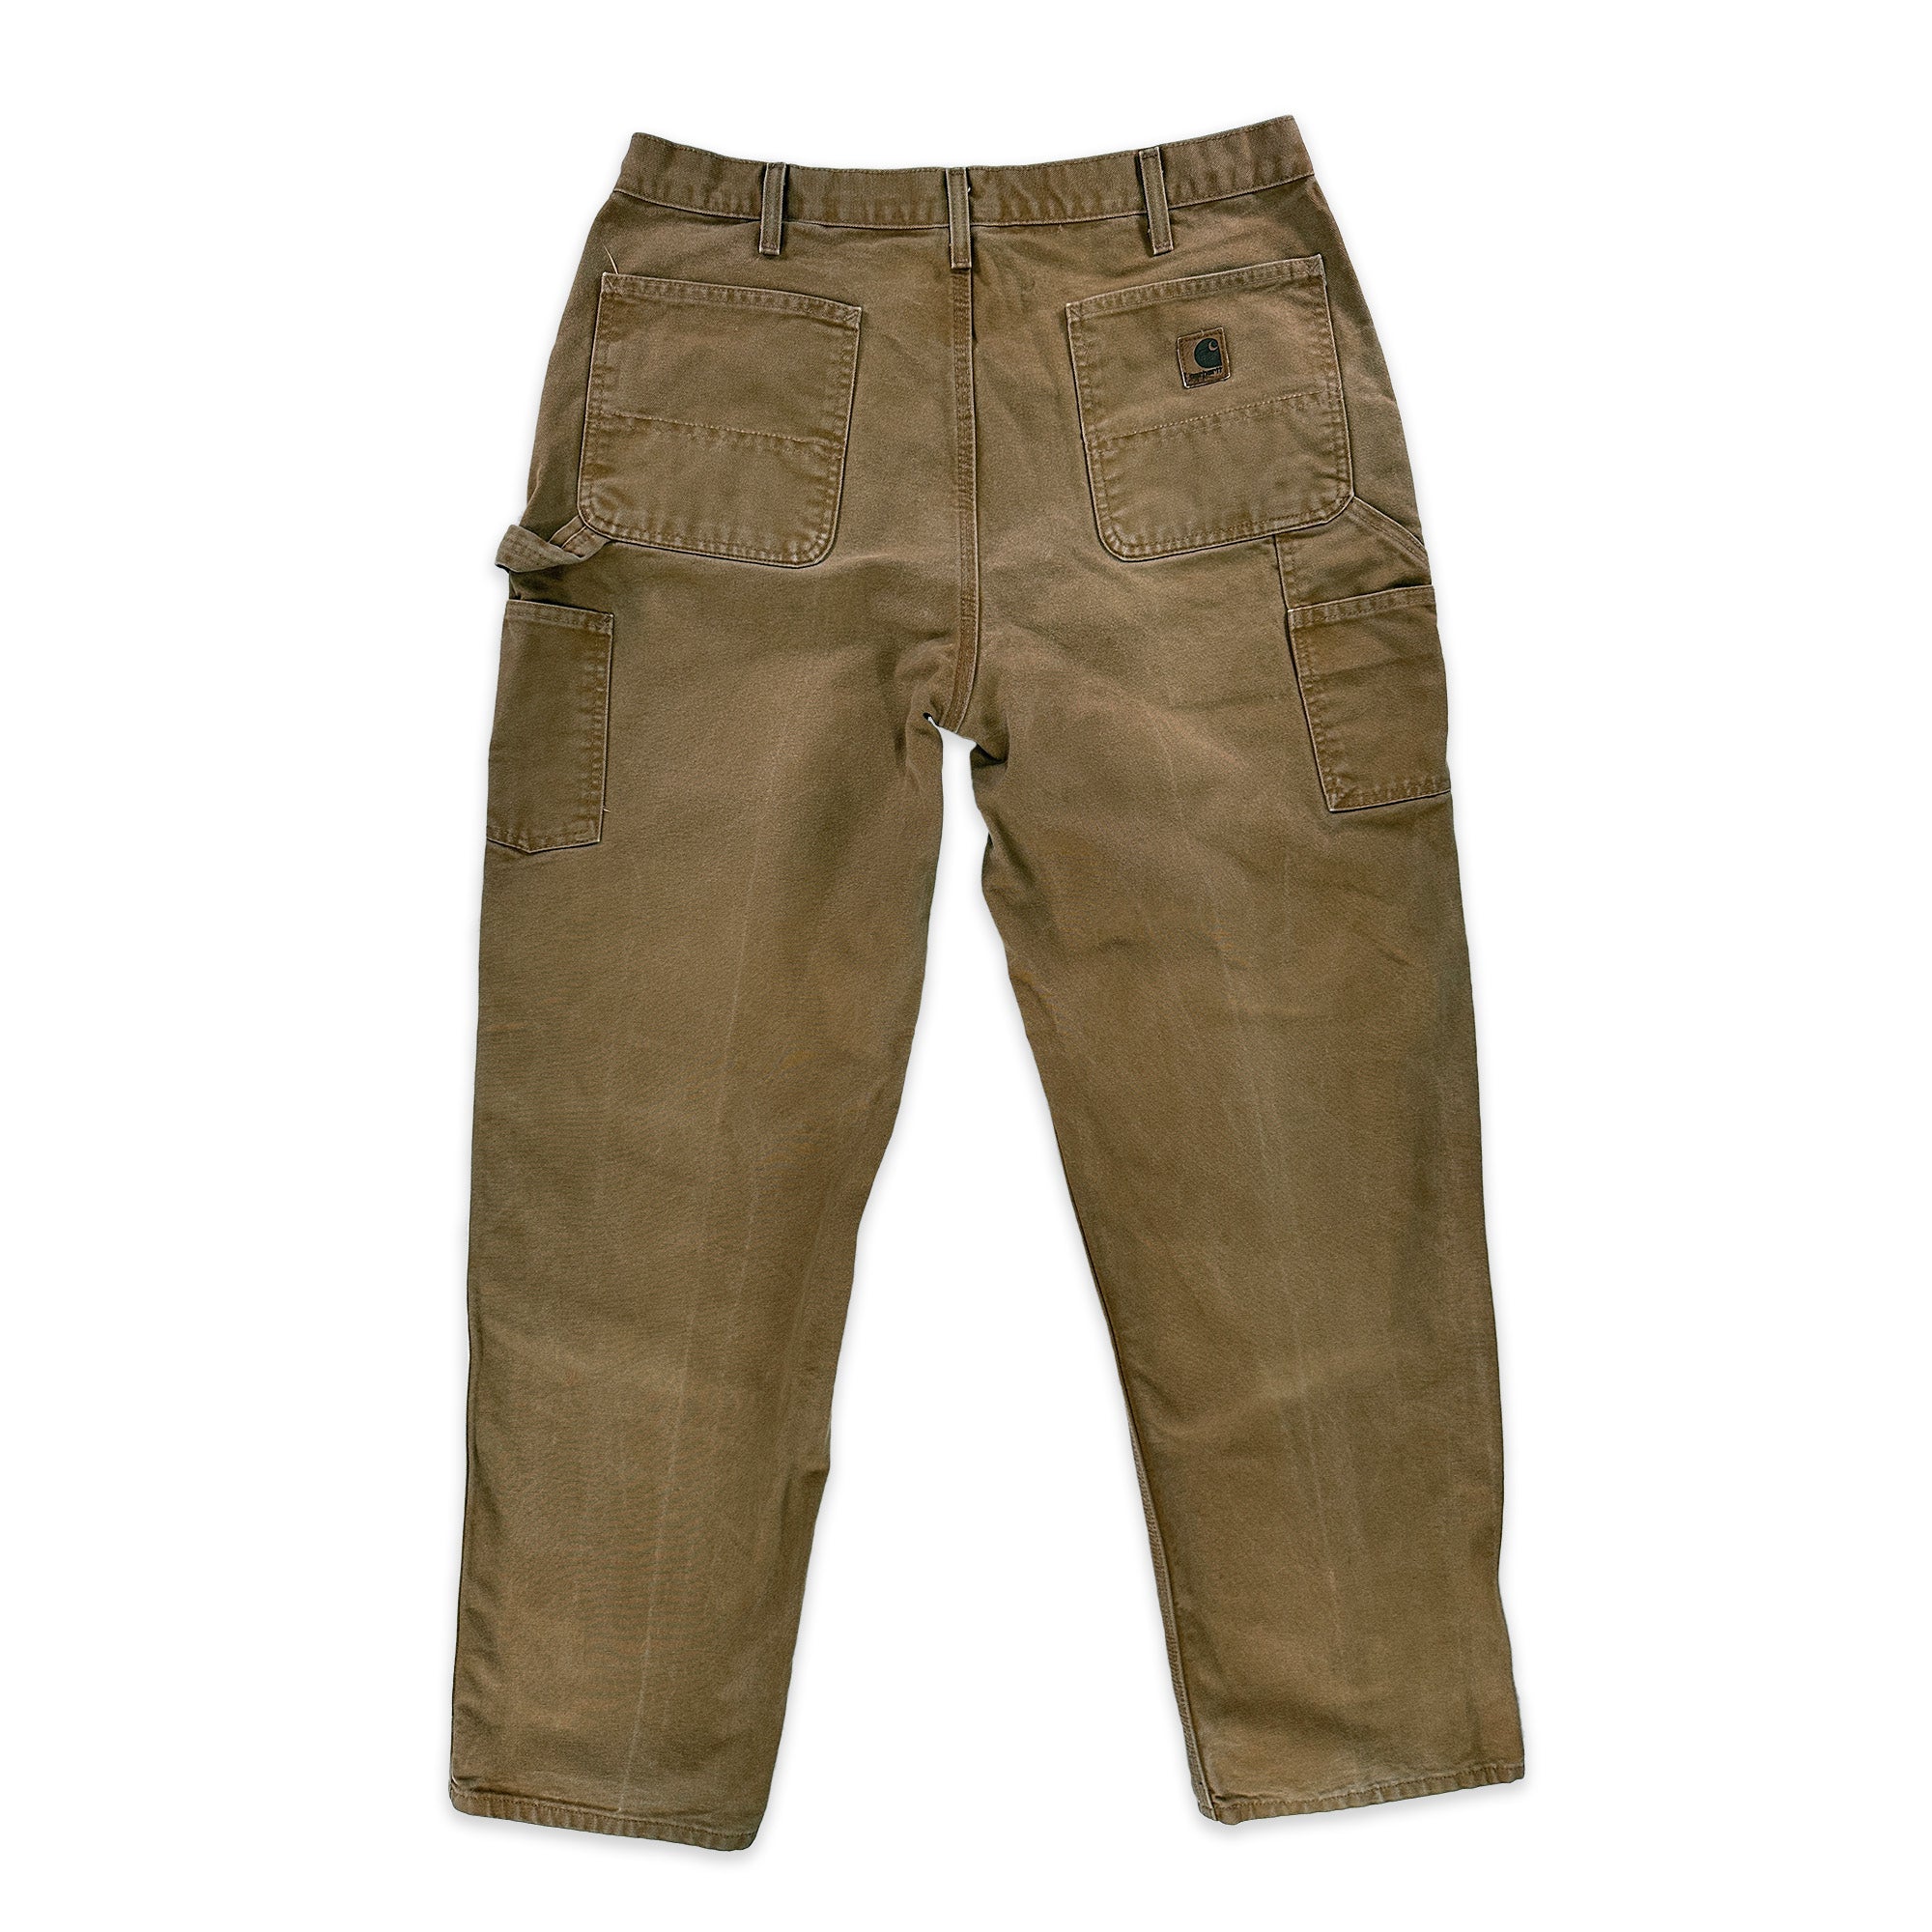 Carhartt B11 BRN Washed Duck Loose Fit Pant - Men's 36x34 - 0